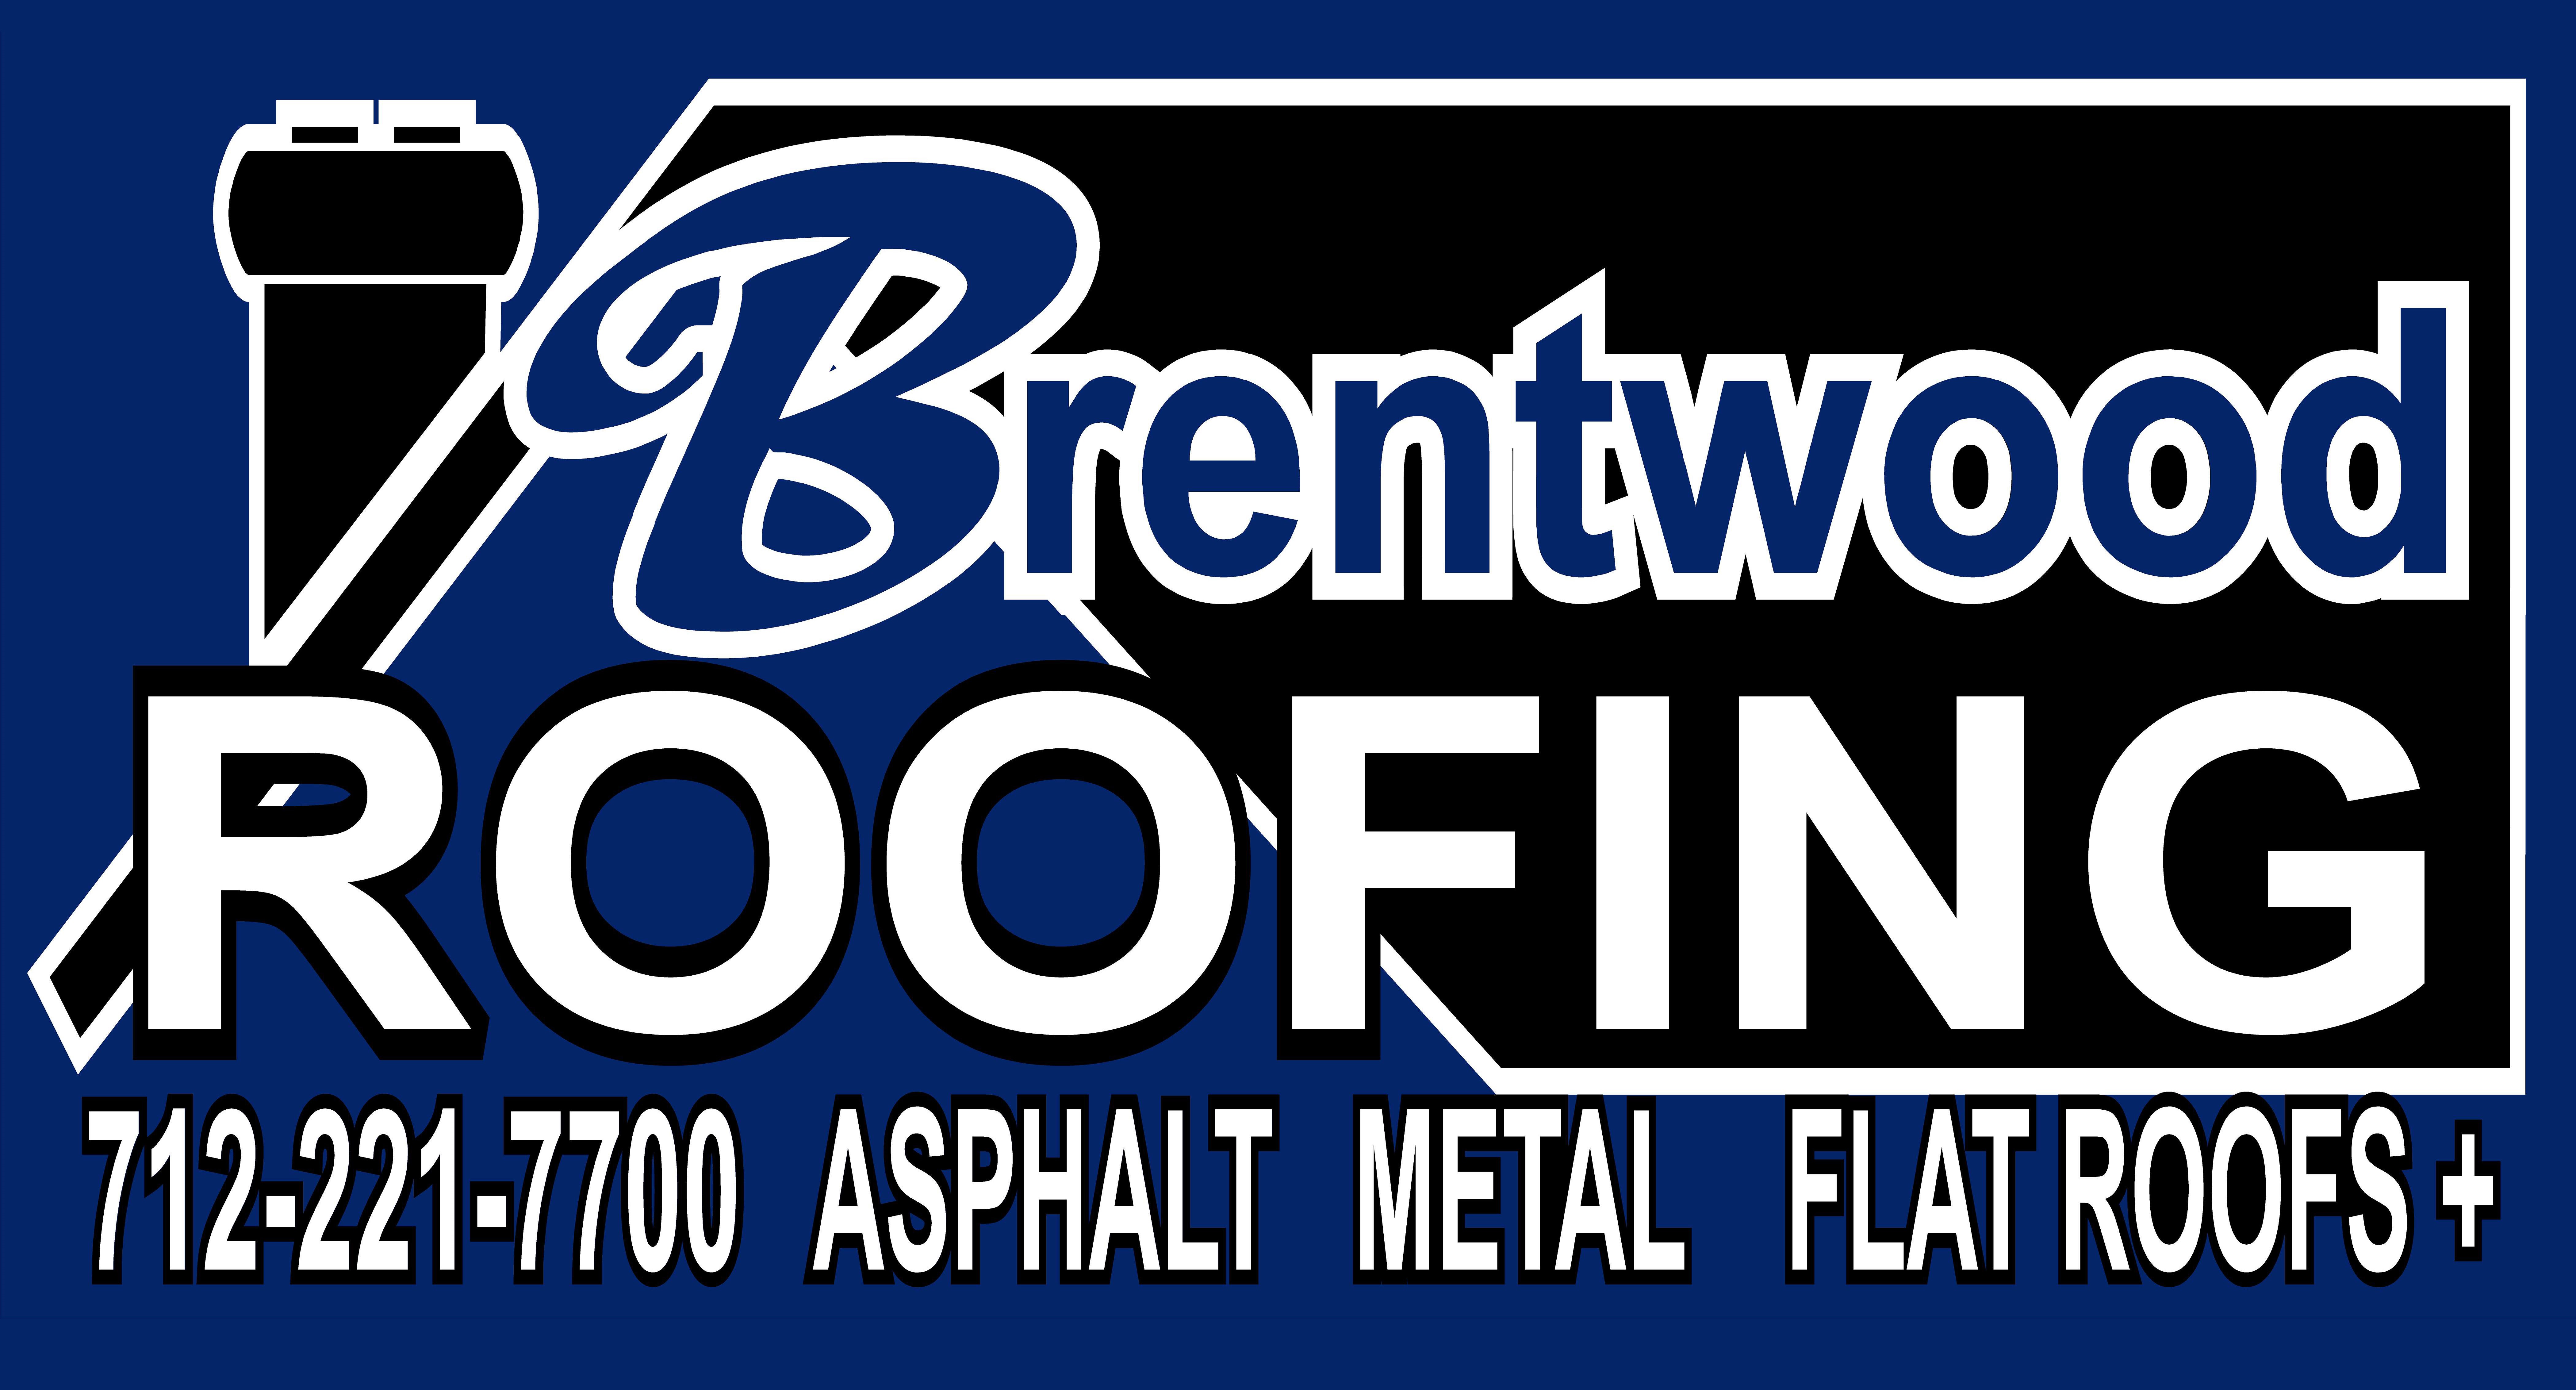 brentwood roofing